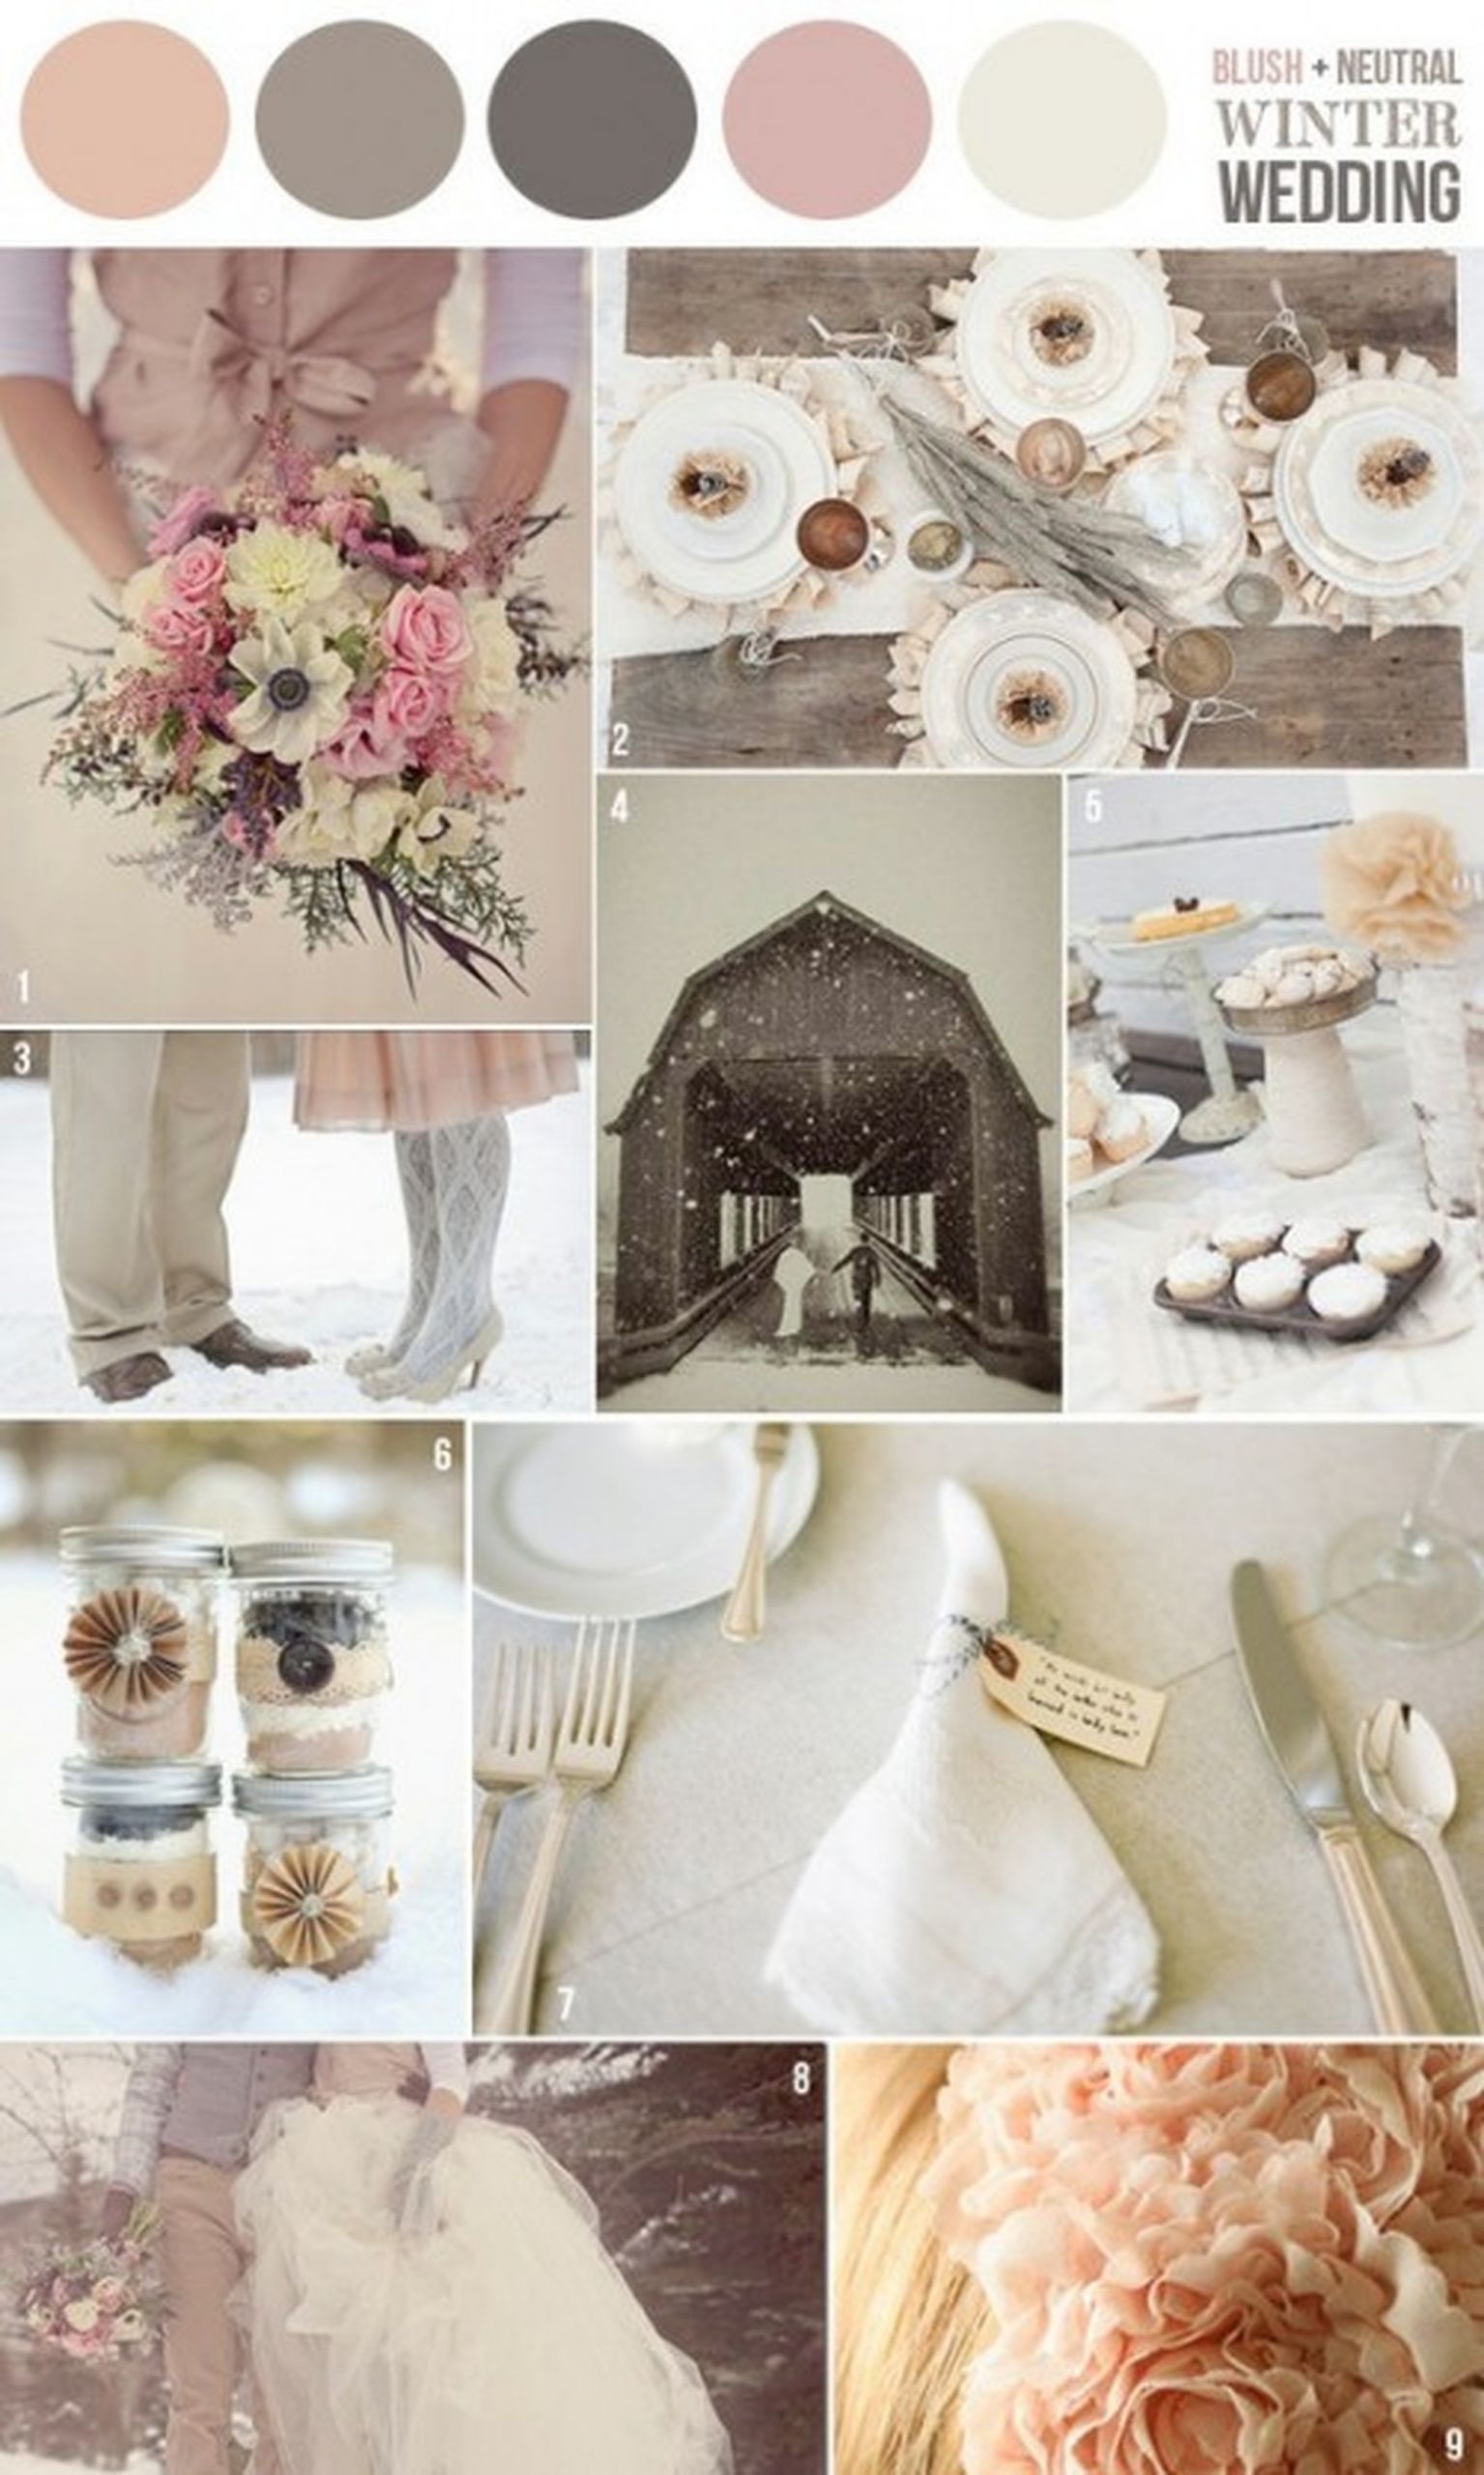 How To Pick A Wedding Theme
 How to Pick a Memorable Winter Wedding Theme in 3 Easy